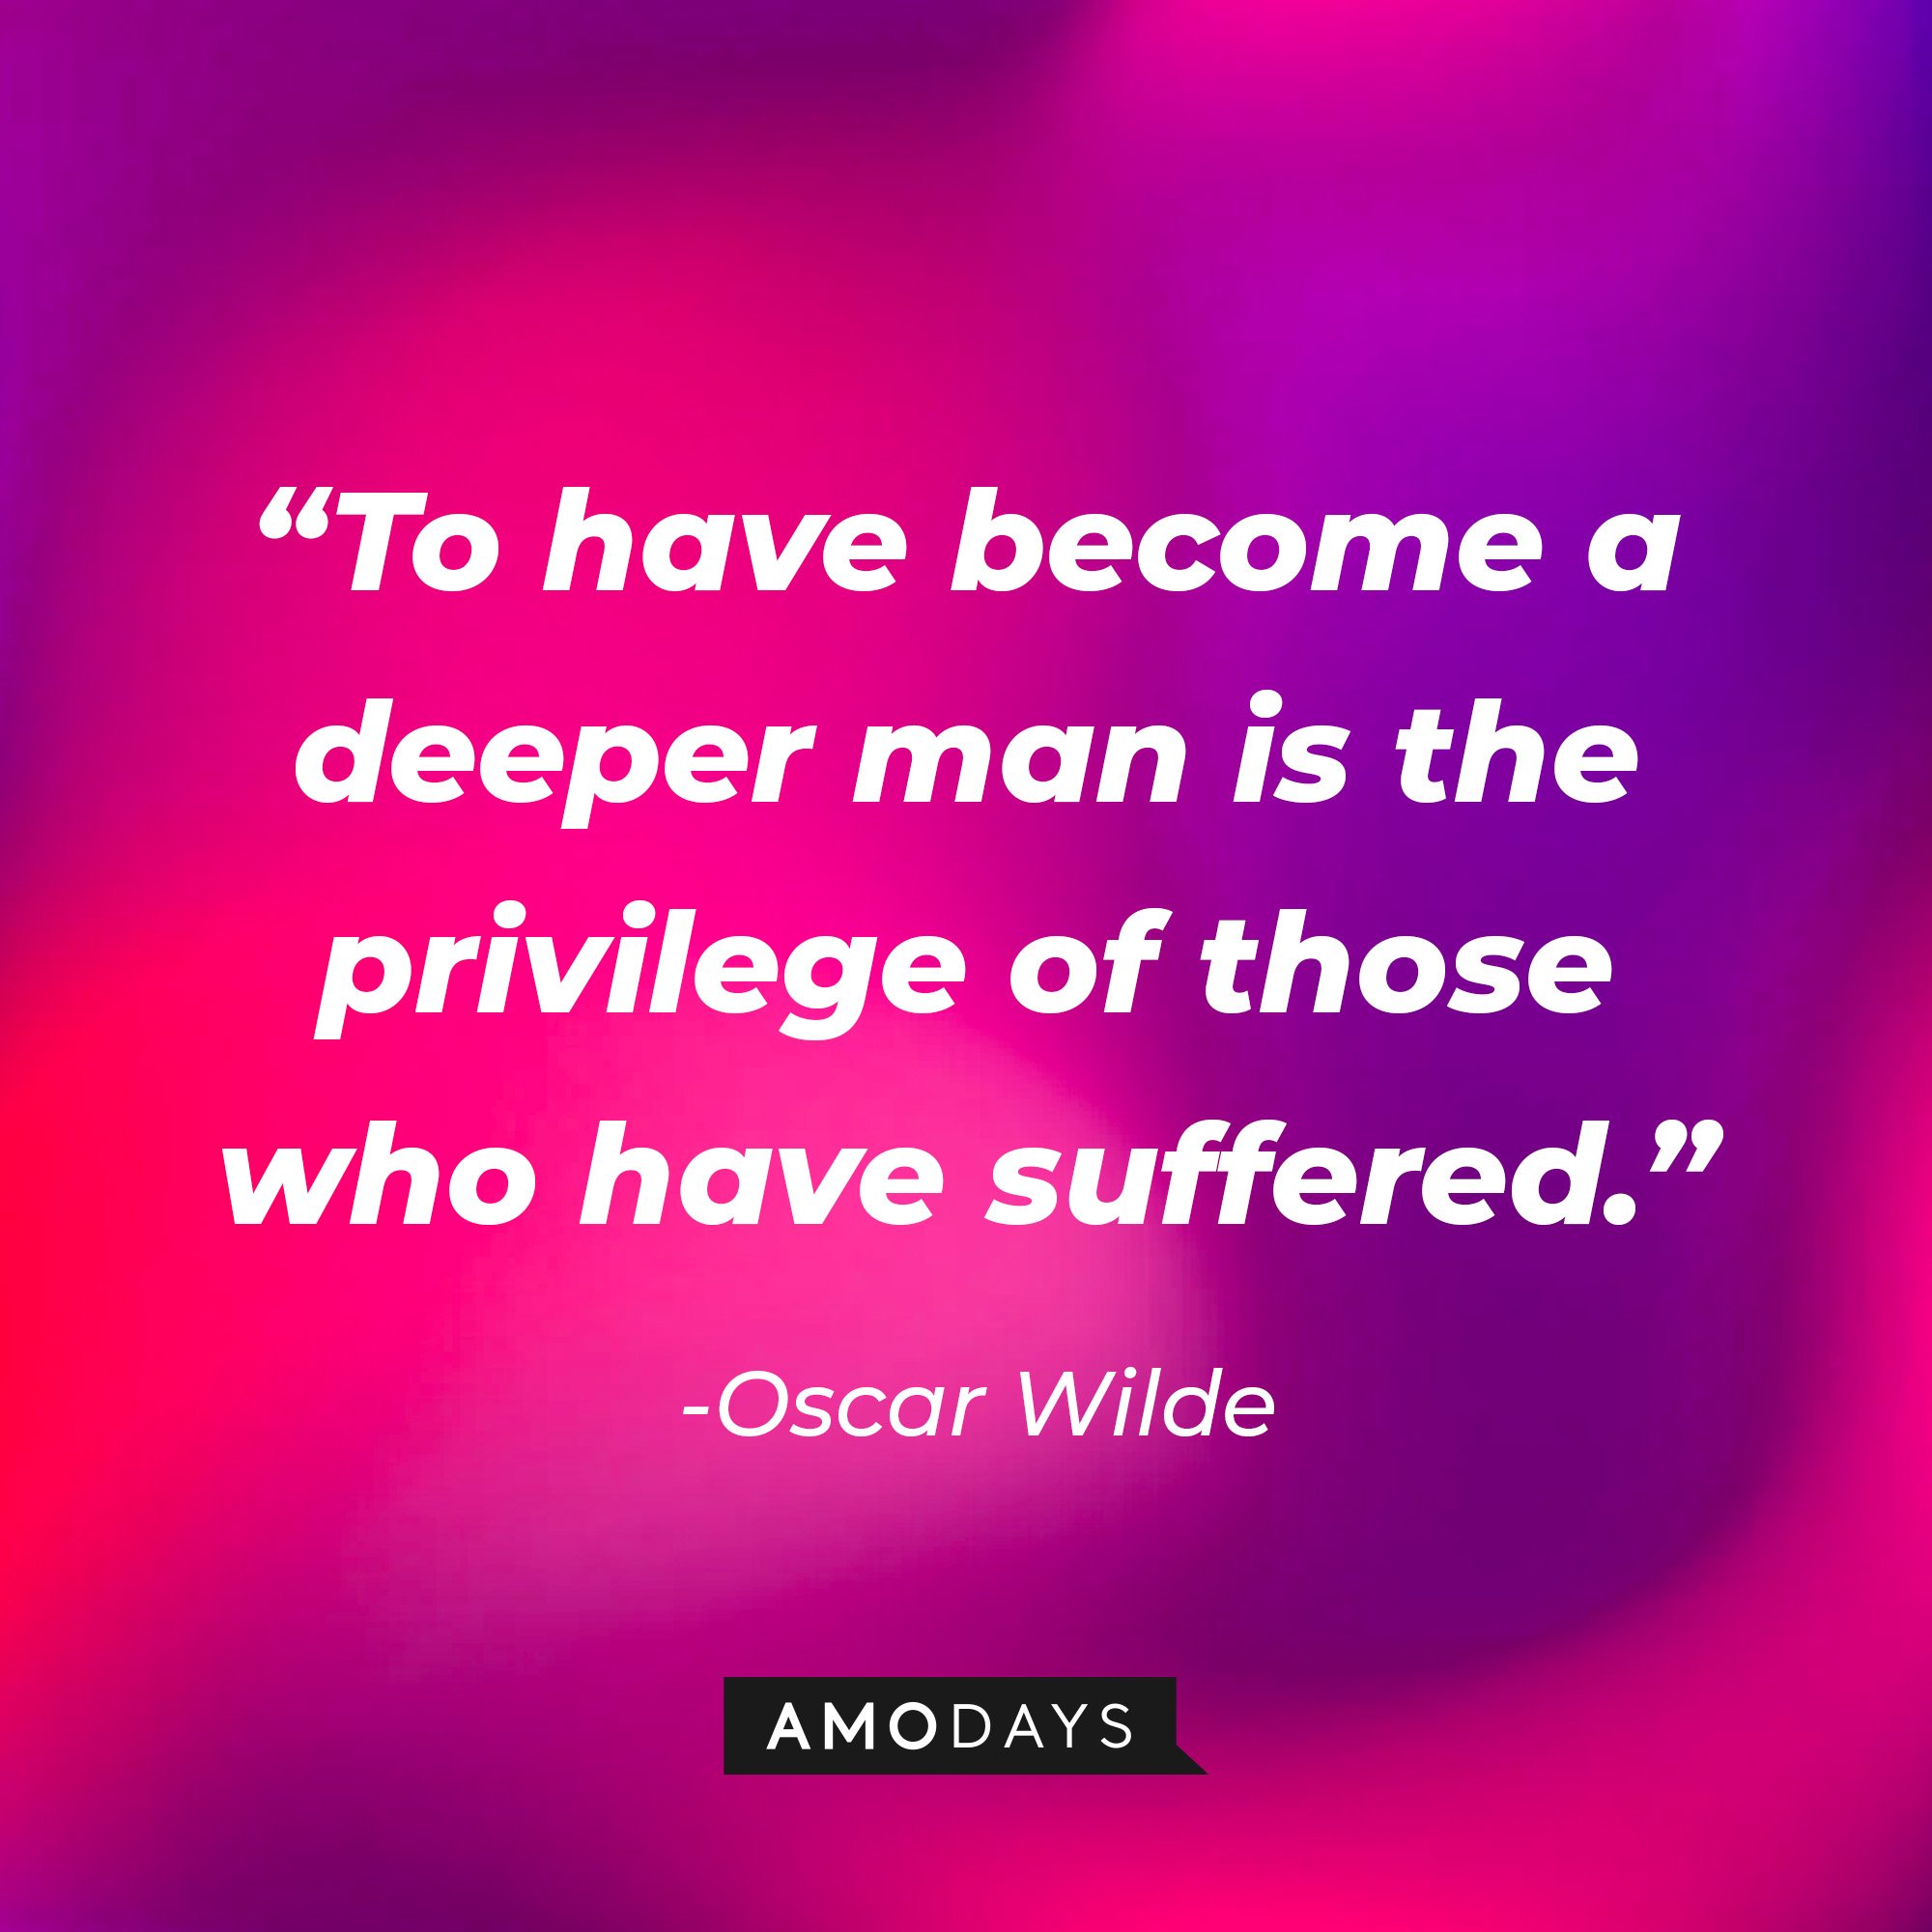 Oscar Wilde's quote: “To have become a deeper man is the privilege of those who have suffered.” | Image: AmoDays